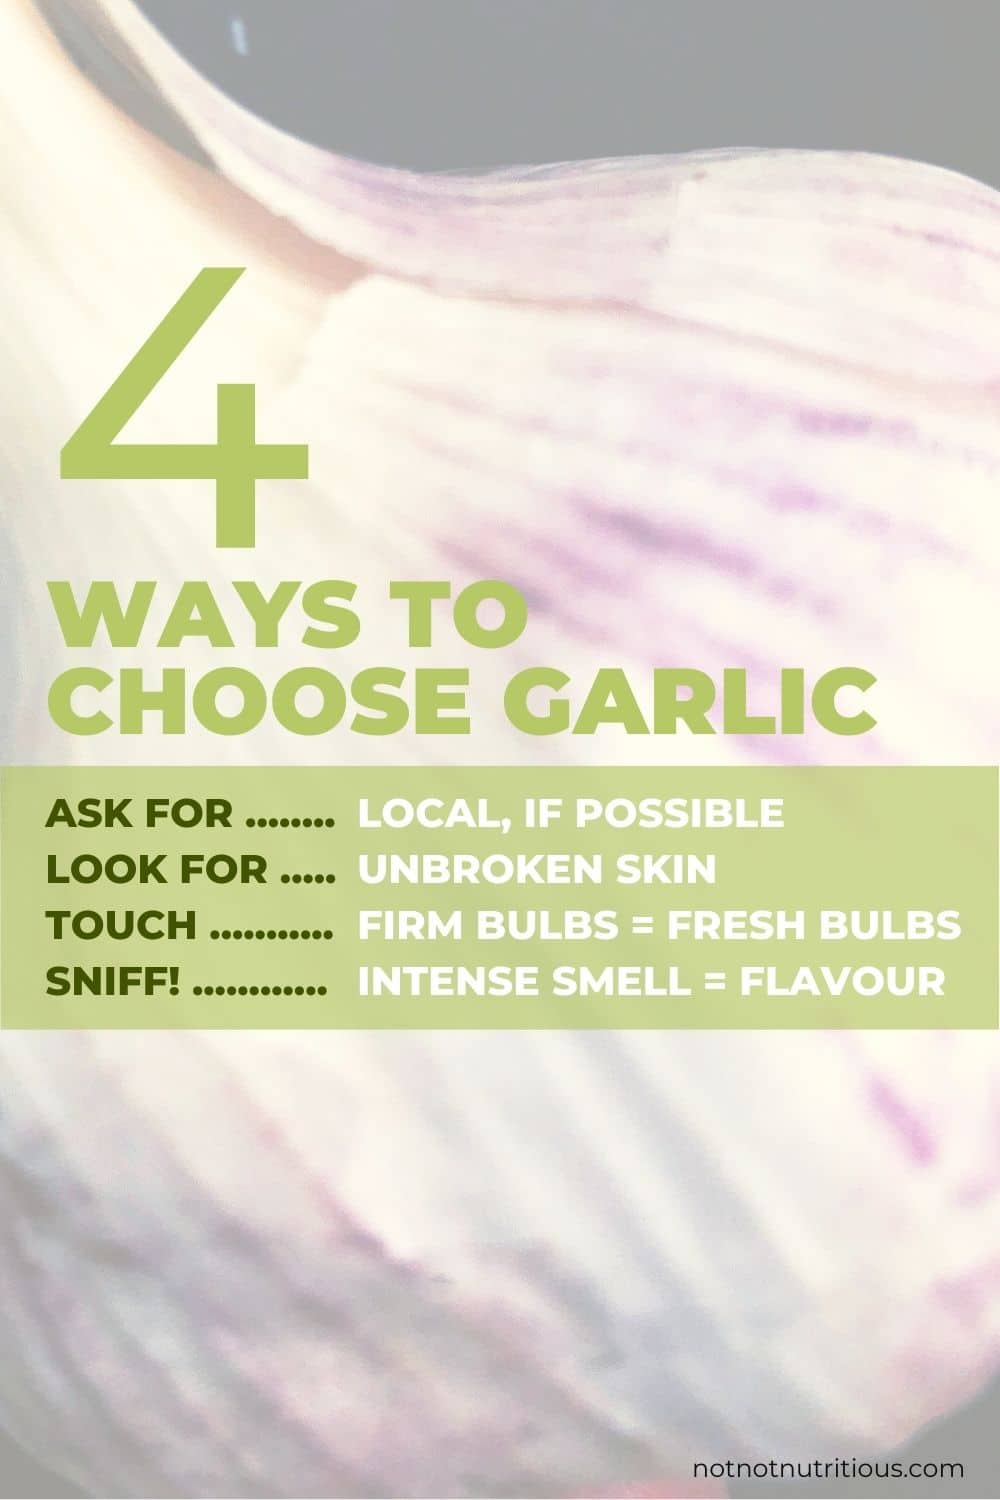 Infographic: 4 ways to choose garlic 1) Ask for local garlic, if possible 2) Look for unbroken skin, 3) Touch, firm bulbs mean it's fresh 4) sniff! An intense smell means it will have good flavour